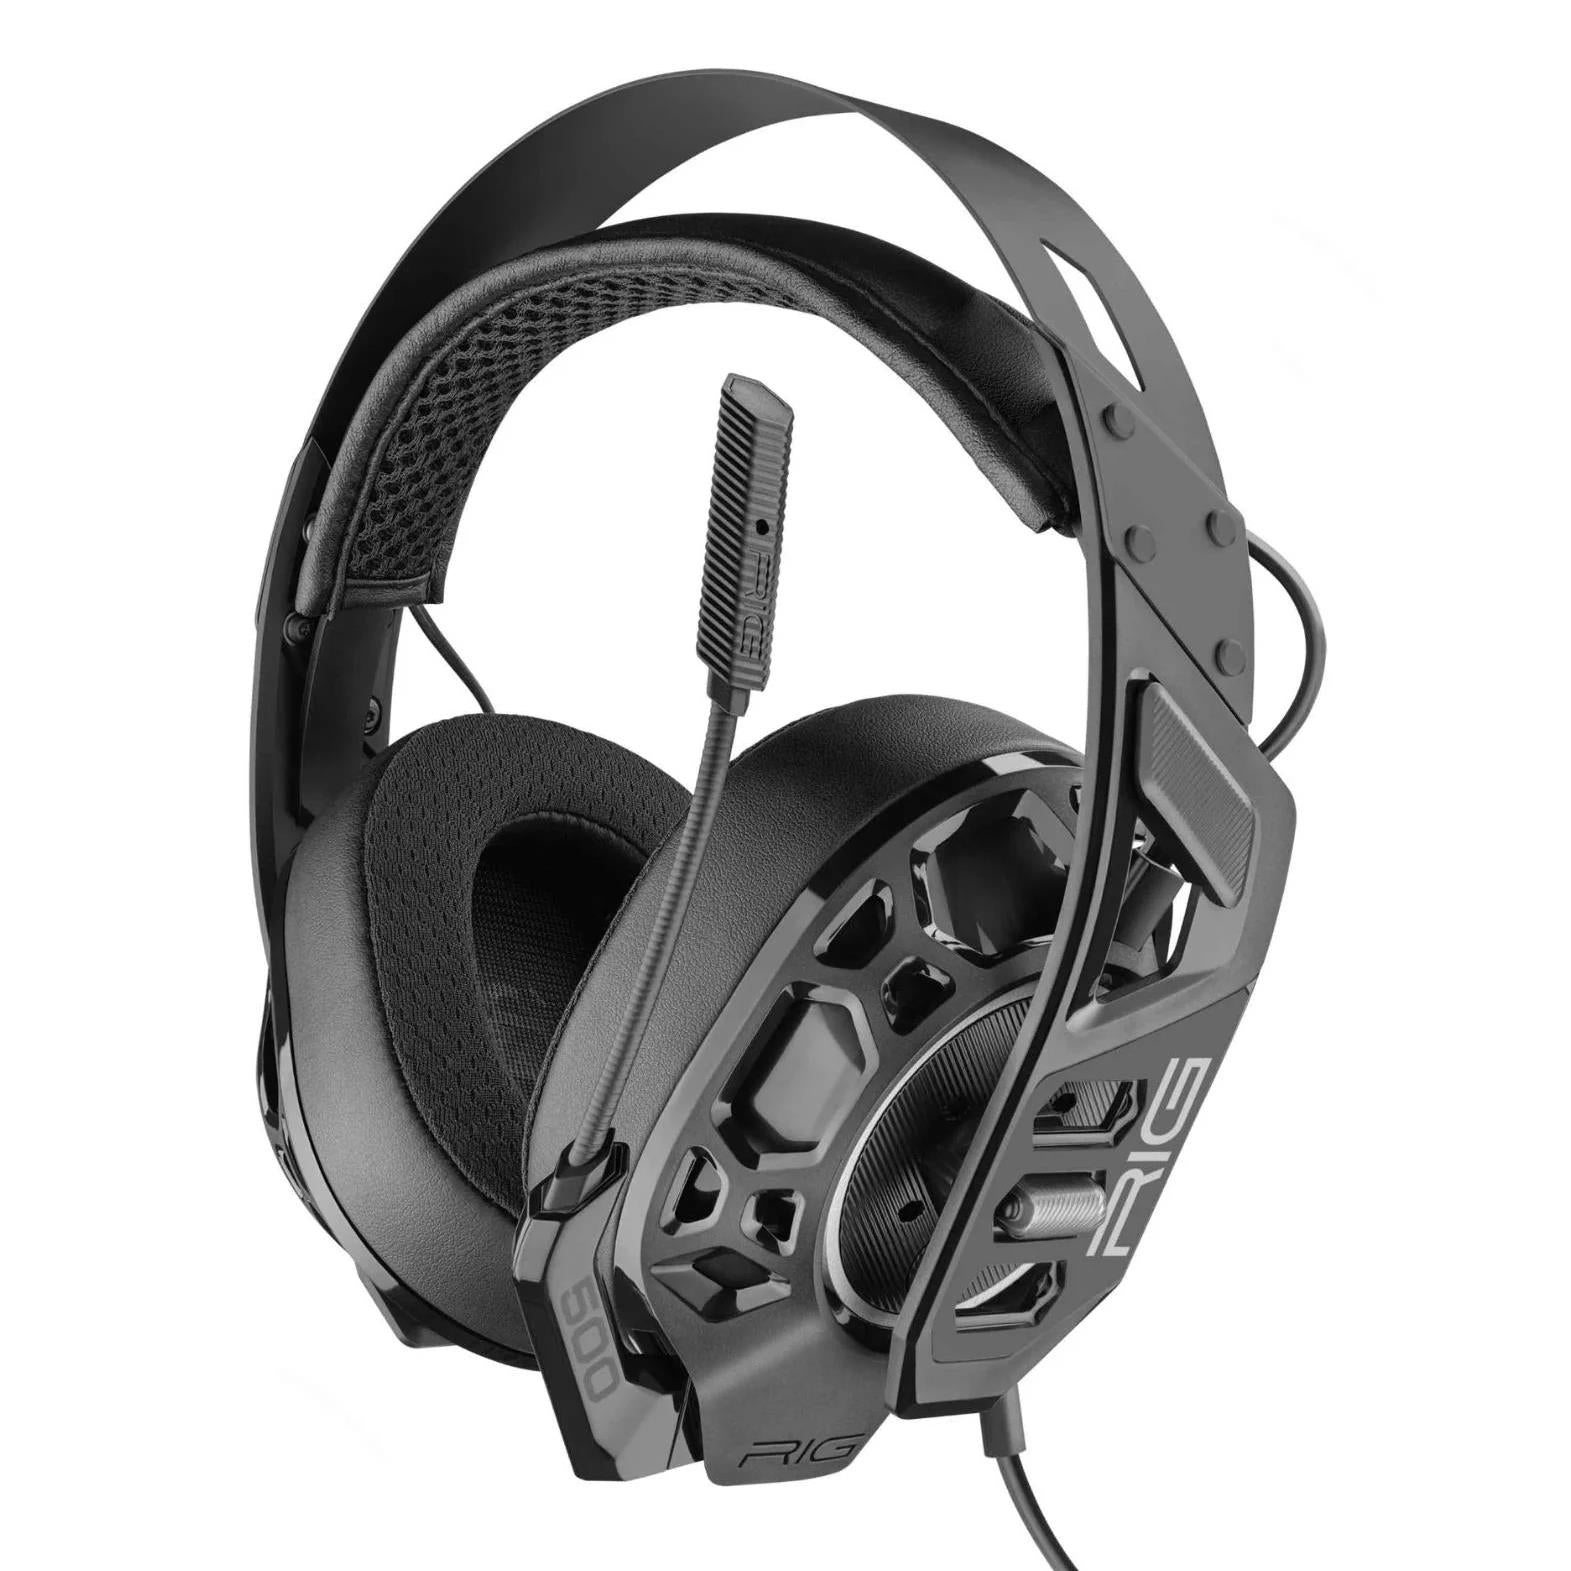 rig 500 pro hx gaming headset for xbox